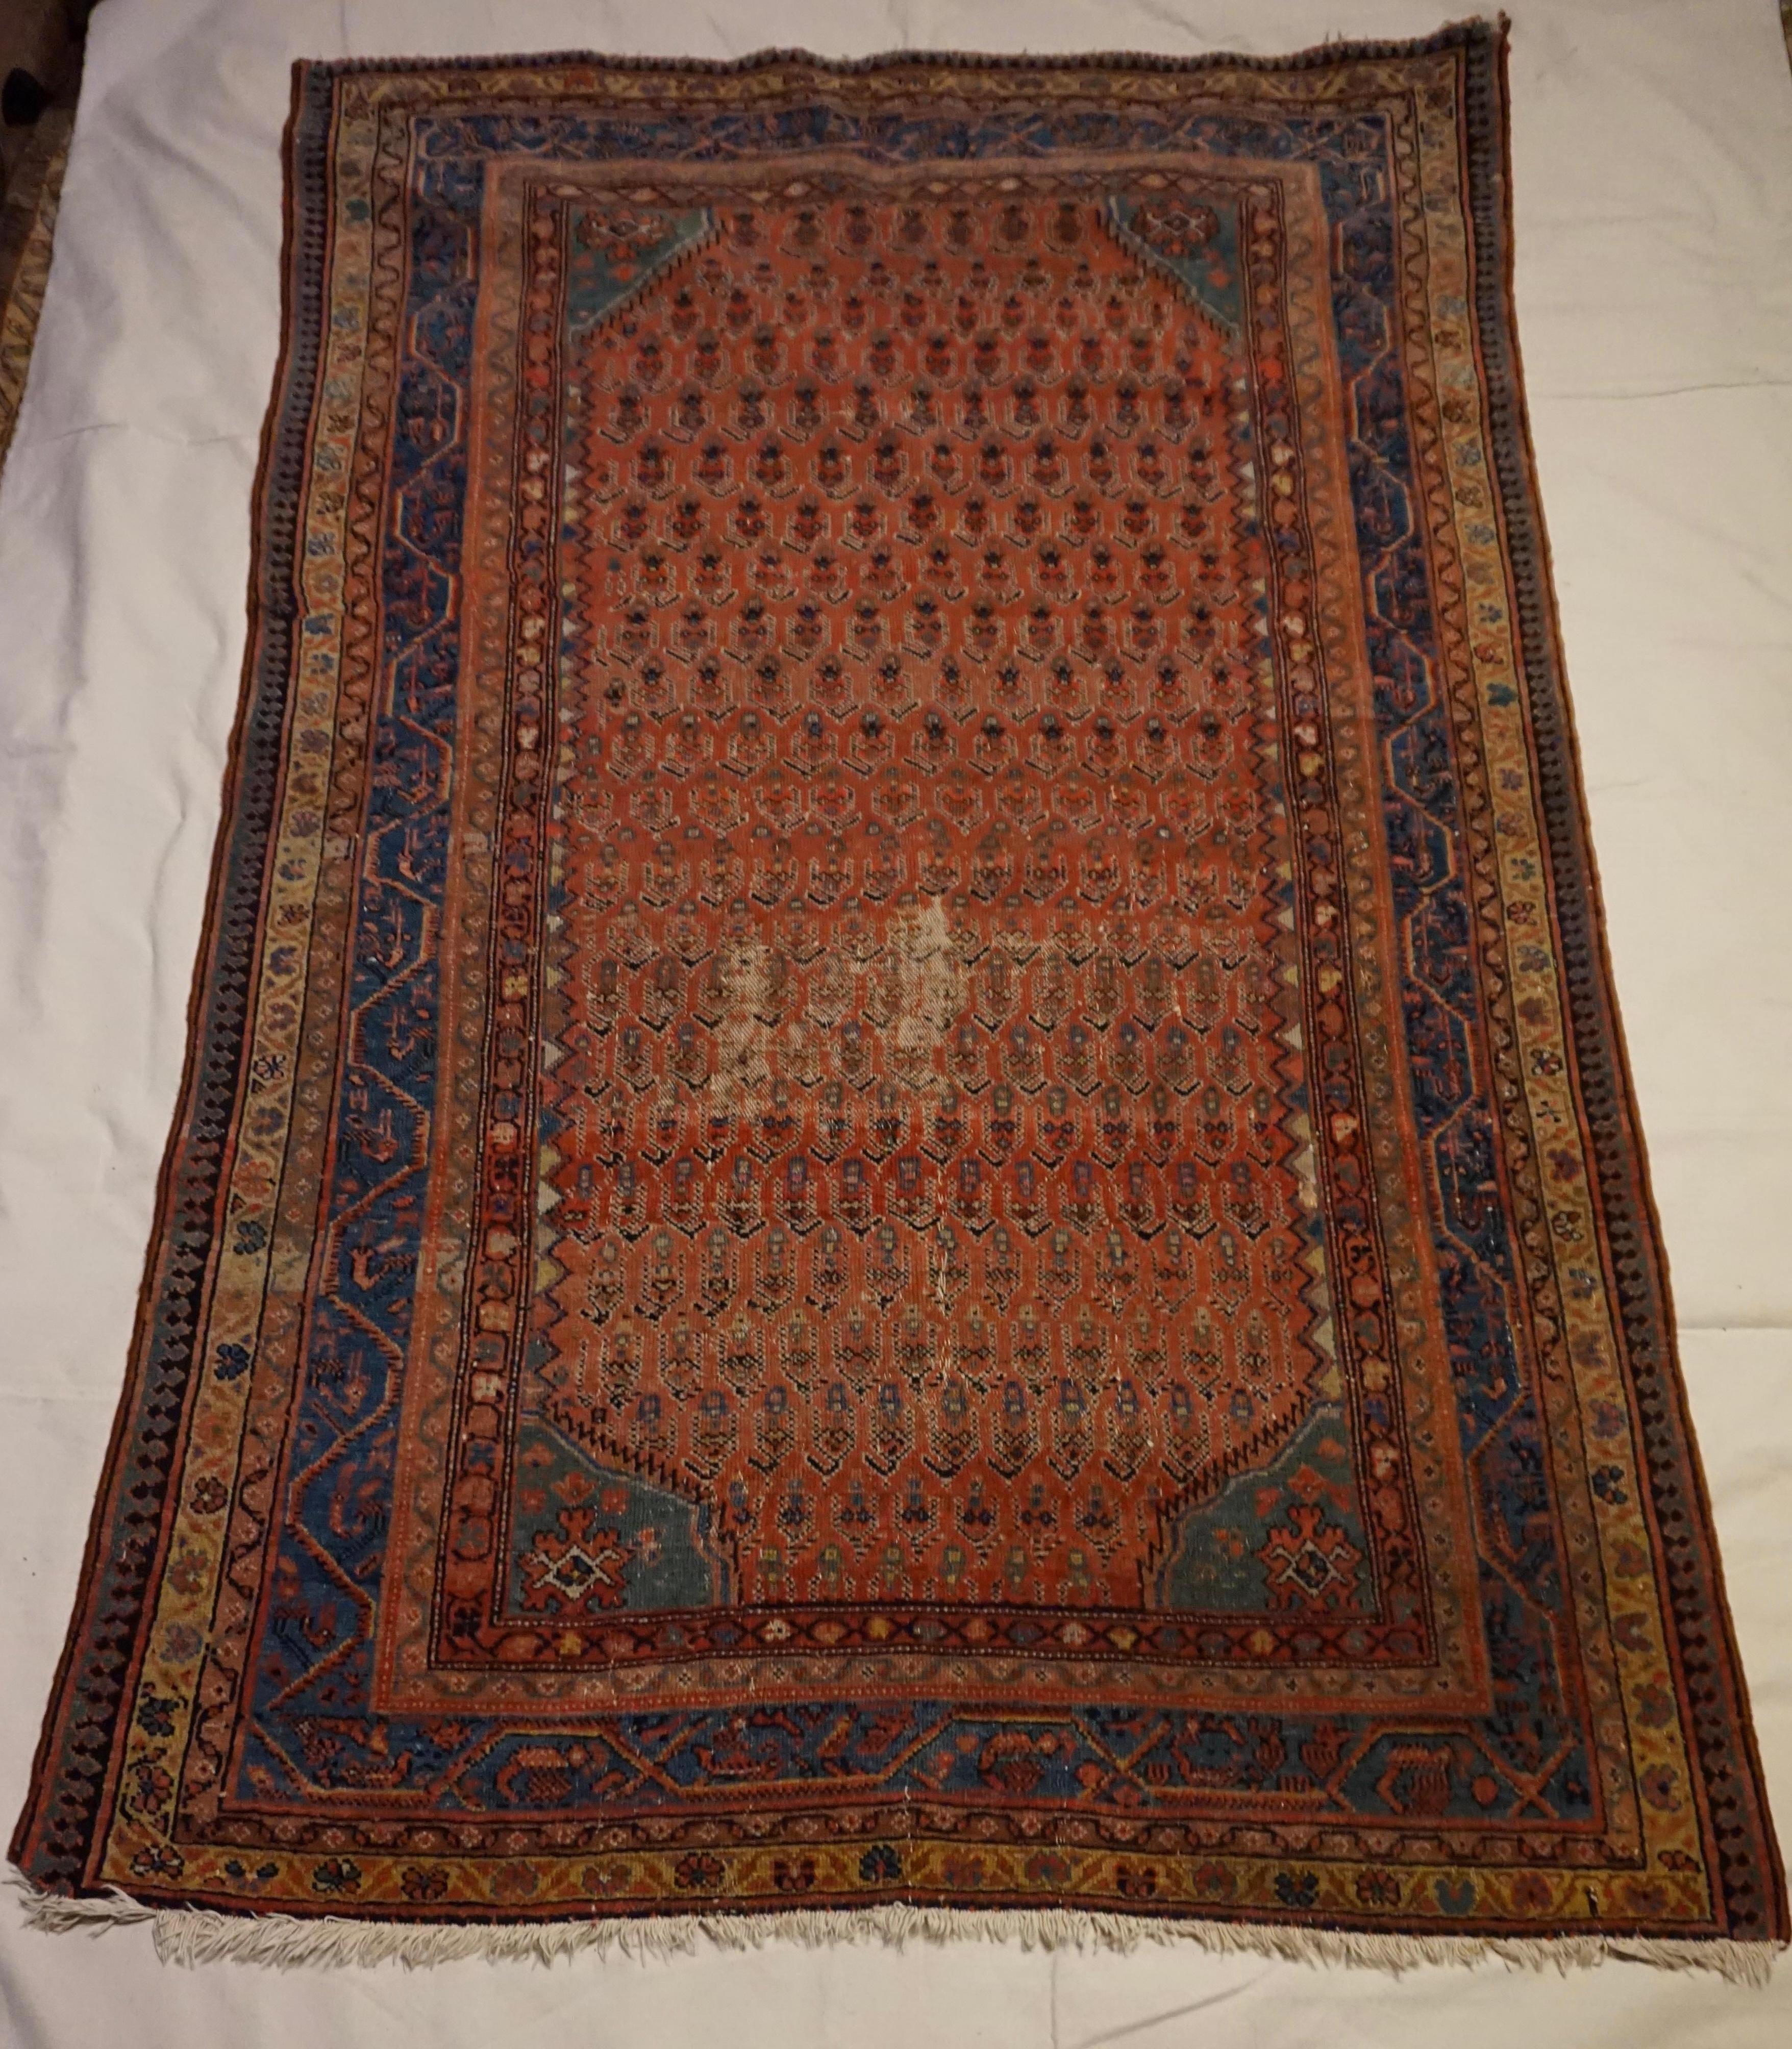 19th Century low pile tribal rug with beautiful paisley pattern hand woven in natural dyes. Intact with some low pile areas consistent with age but still exudes warmth and bygone splendour. Collectible and authentic rug in original condition.